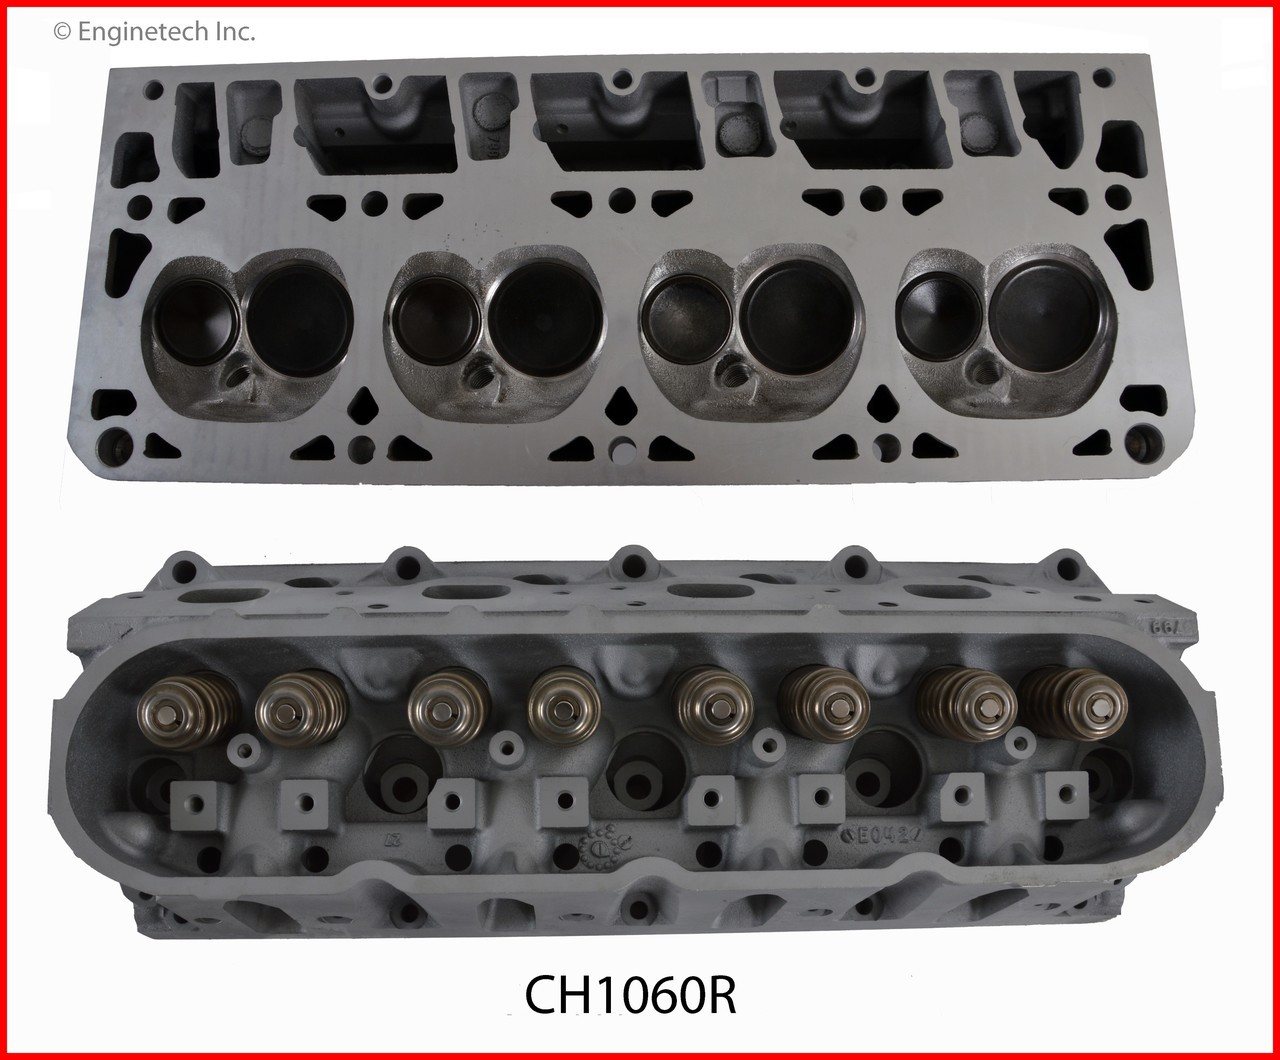 Cylinder Head Assembly - 2005 Chevrolet SSR 6.0L (CH1060R.E41)